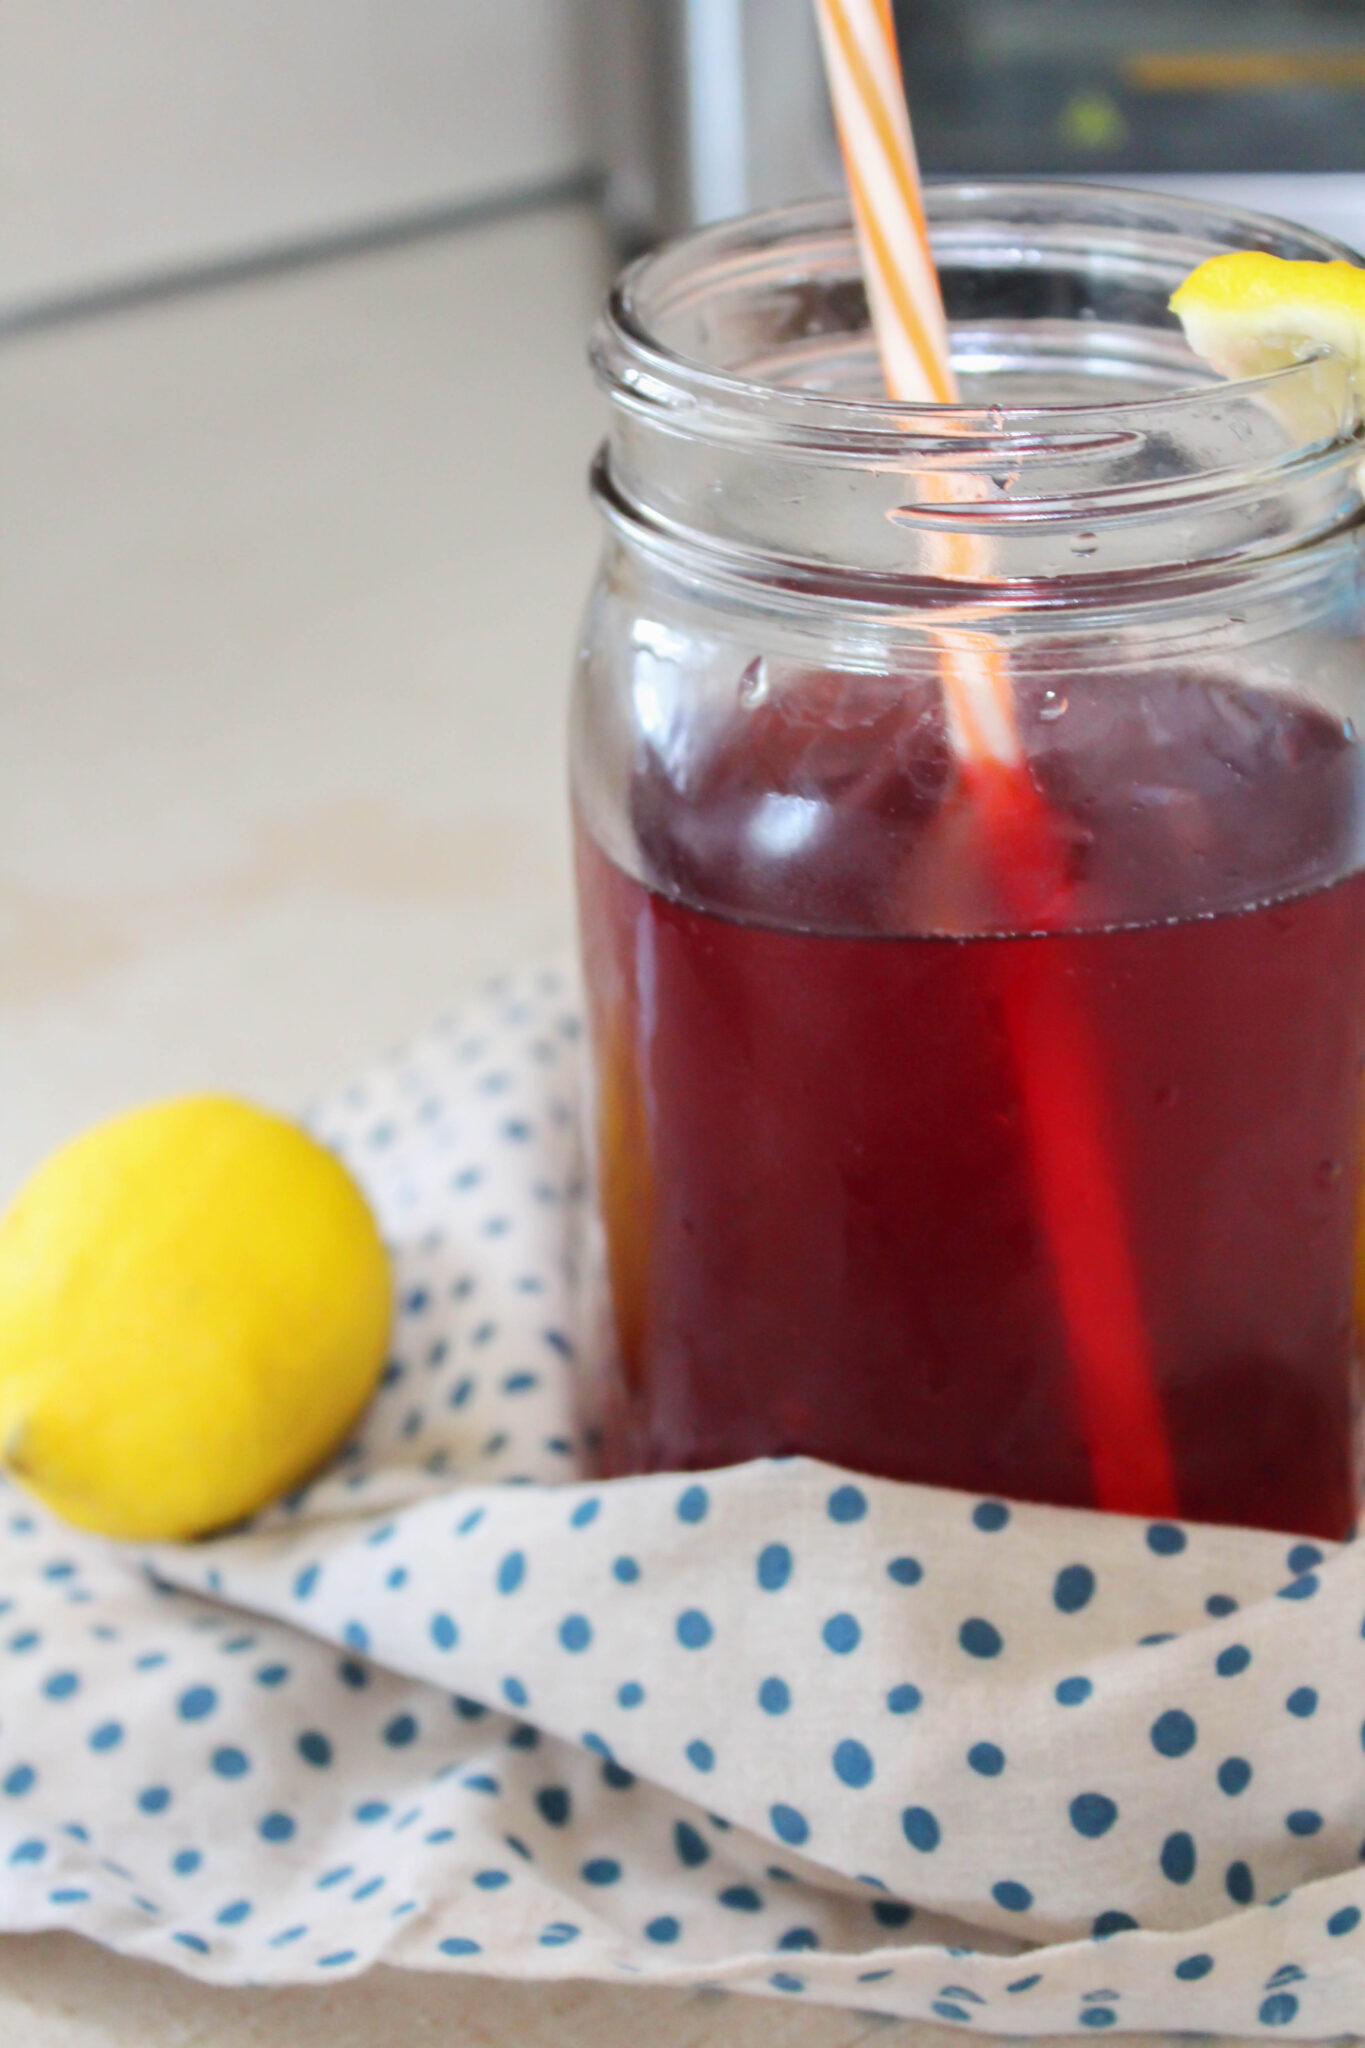 Starbucks Passion Tea Lemonade is one of my favorite drinks. I found a way to make this tea healthier and sugar-free! Check out how I did it here!